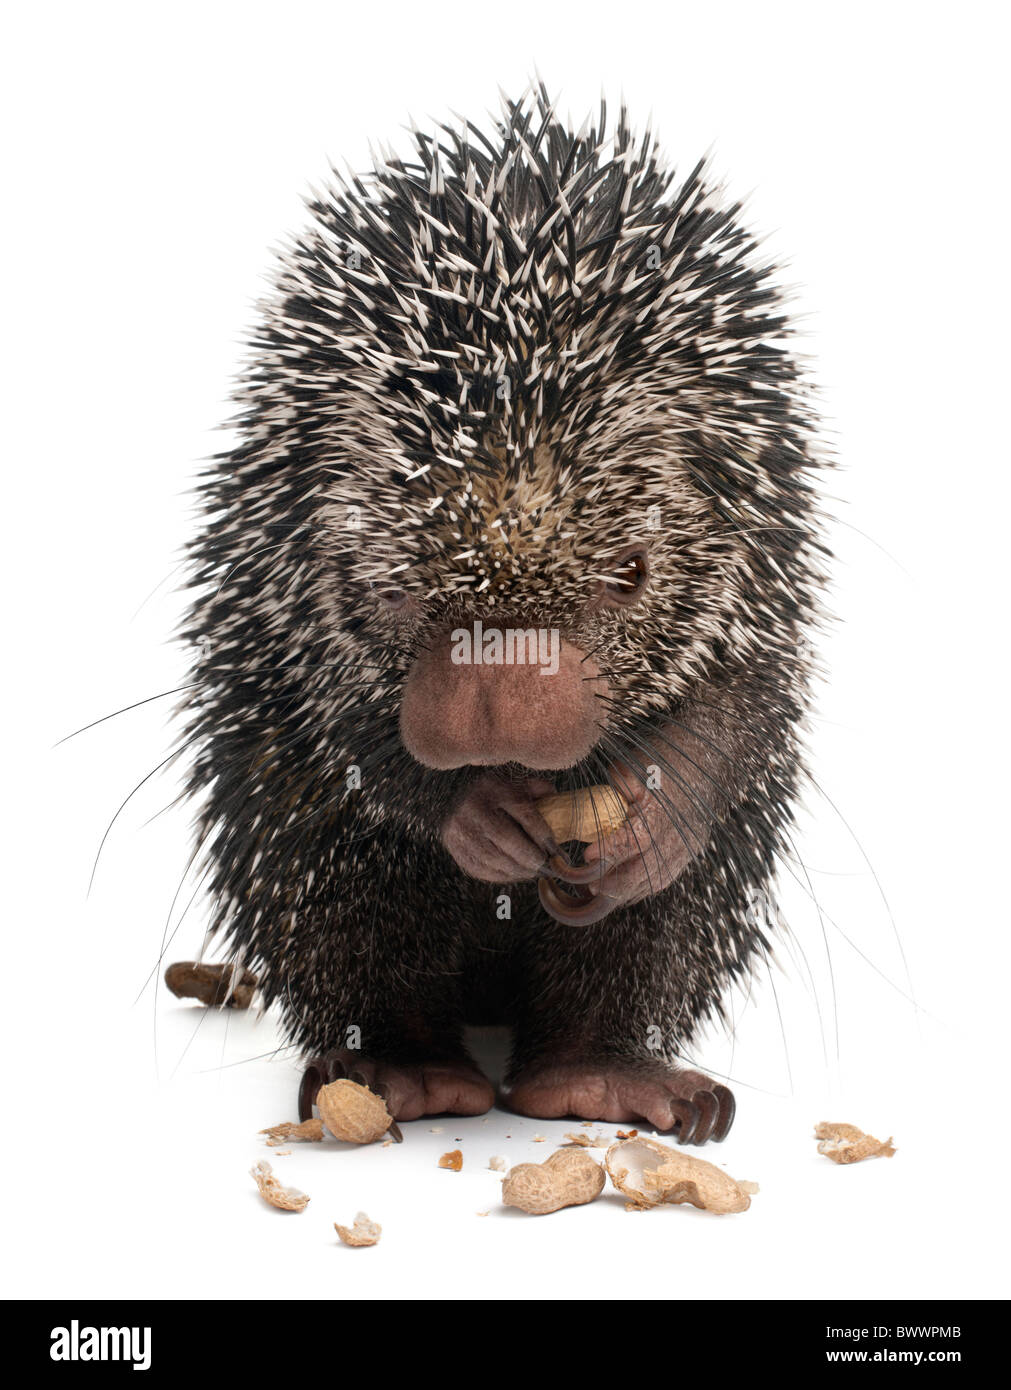 Brazilian Porcupine, Coendou prehensilis, eating peanuts in front of white background Stock Photo